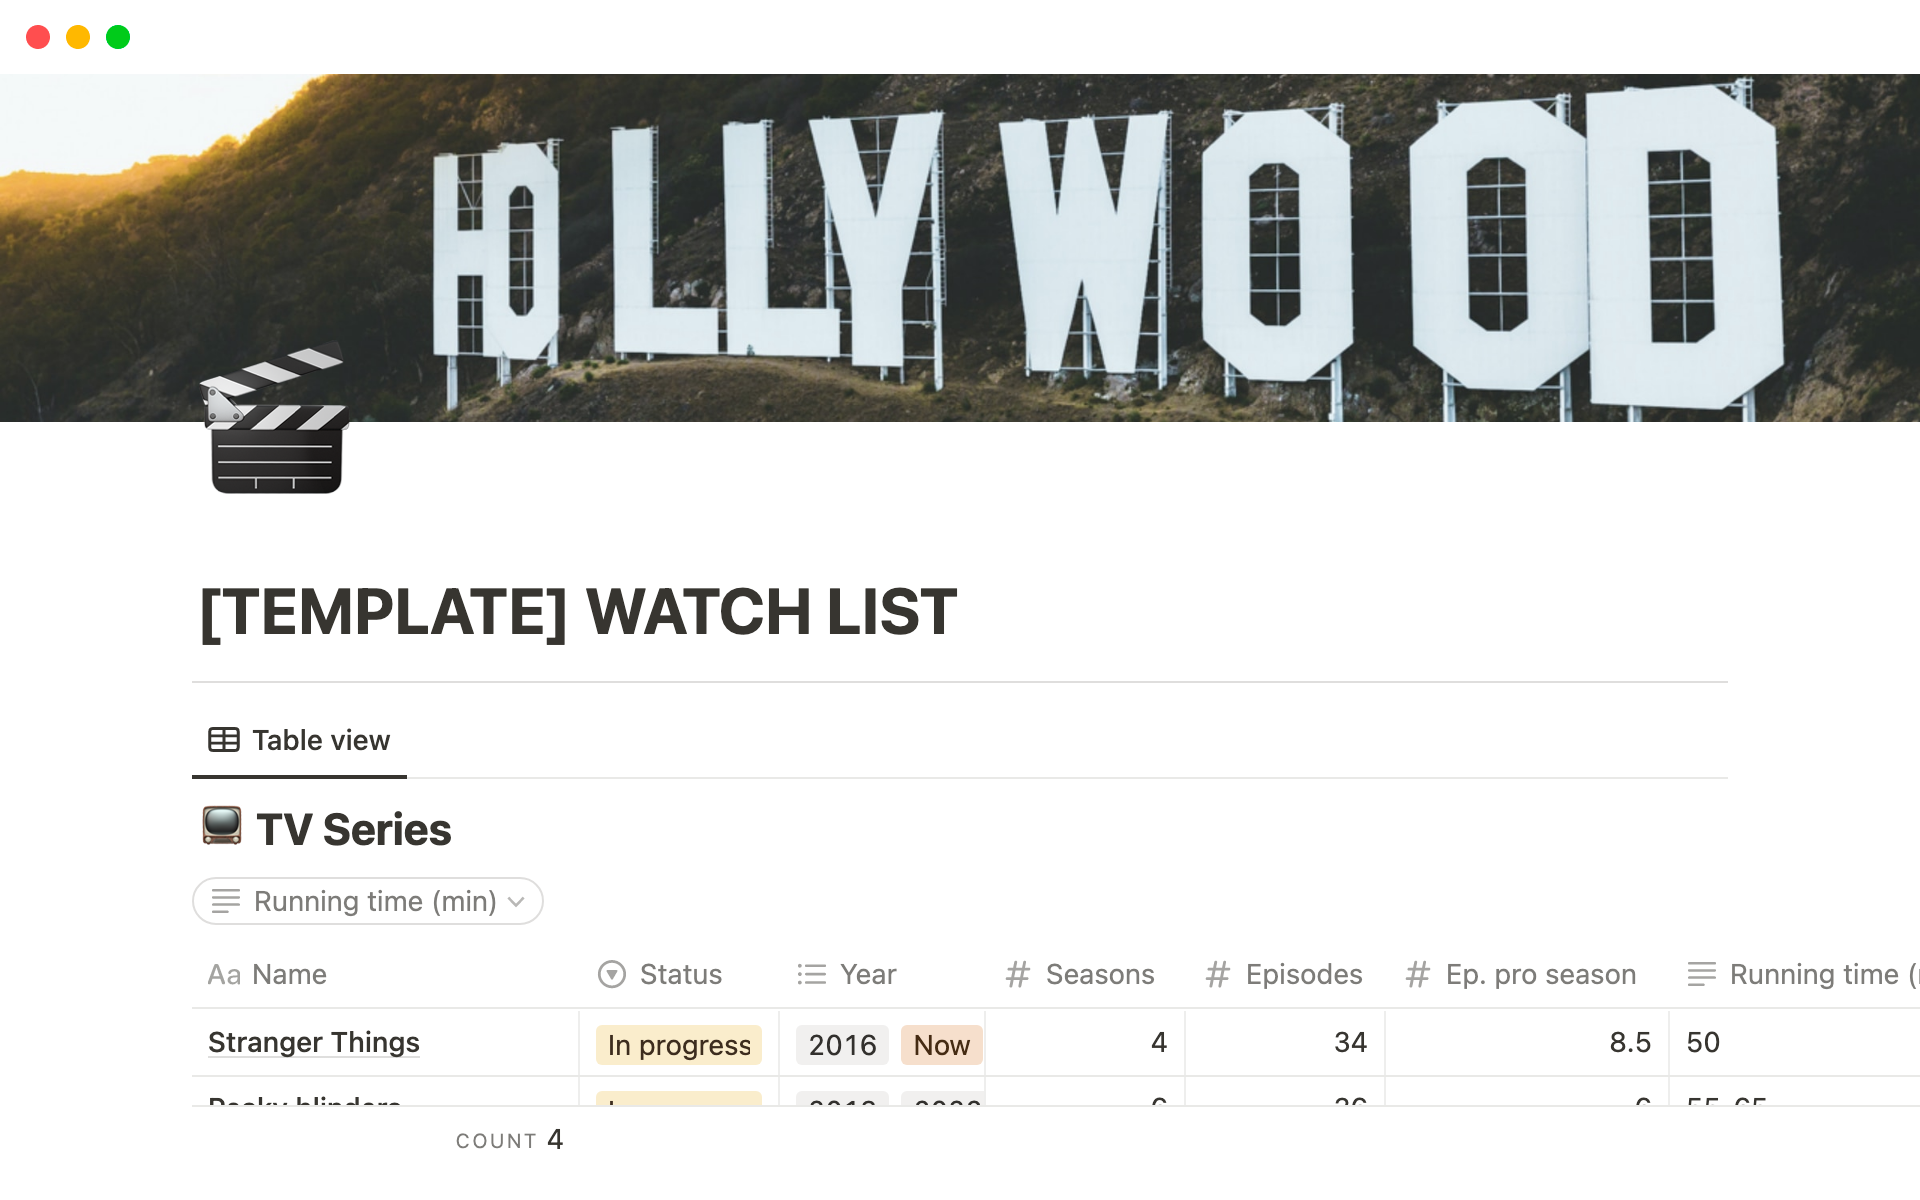 A simple template to organize at best your watch list: movies, TV series/shows, anime, documentaries, etc.